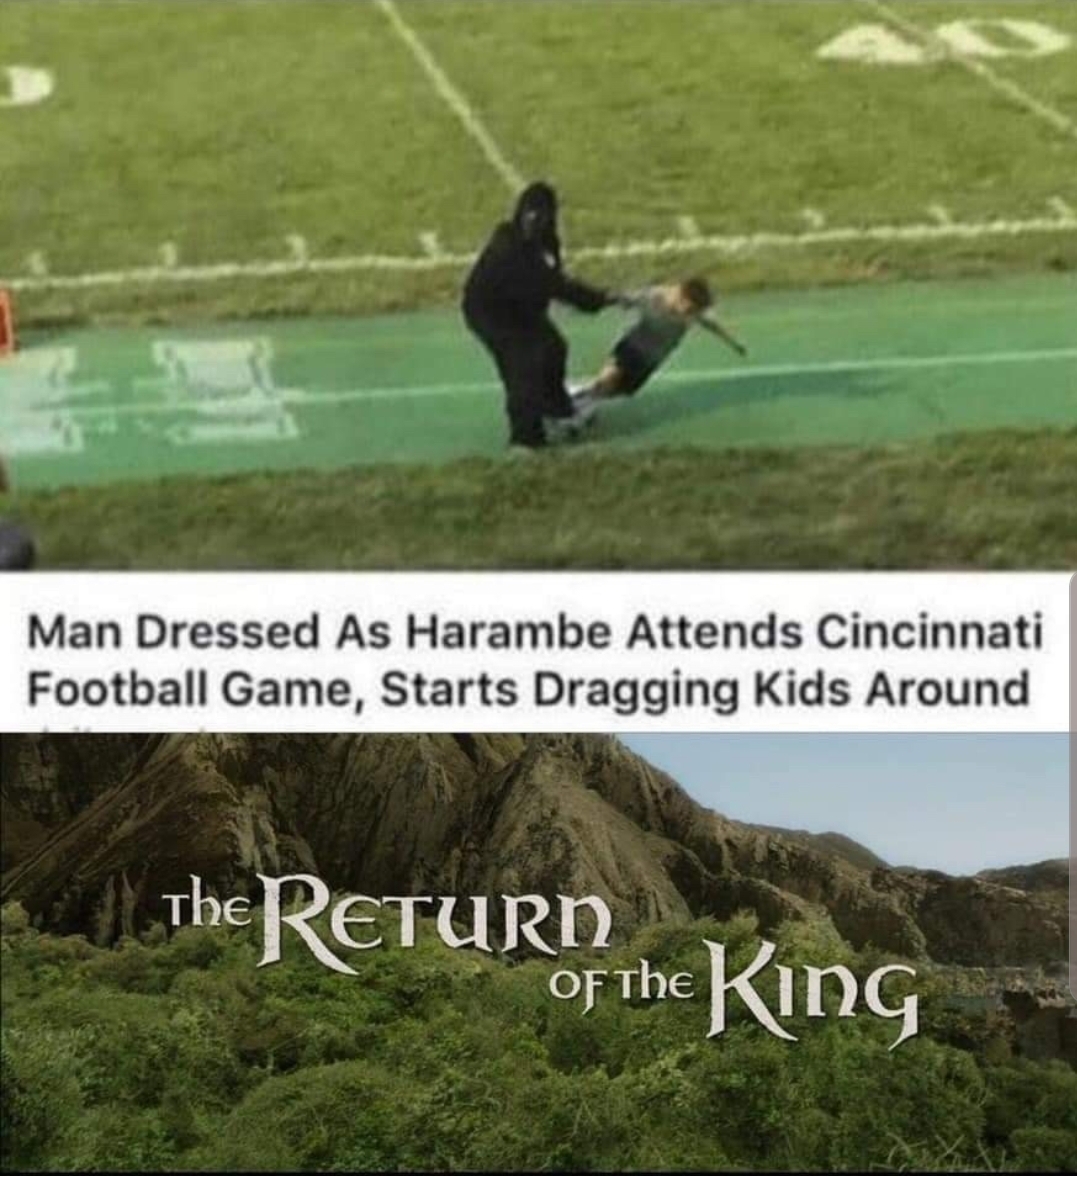 man dressed as harambe attends football game - Man Dressed As Harambe Attends Cincinnati Football Game, Starts Dragging Kids Around The Return of the King